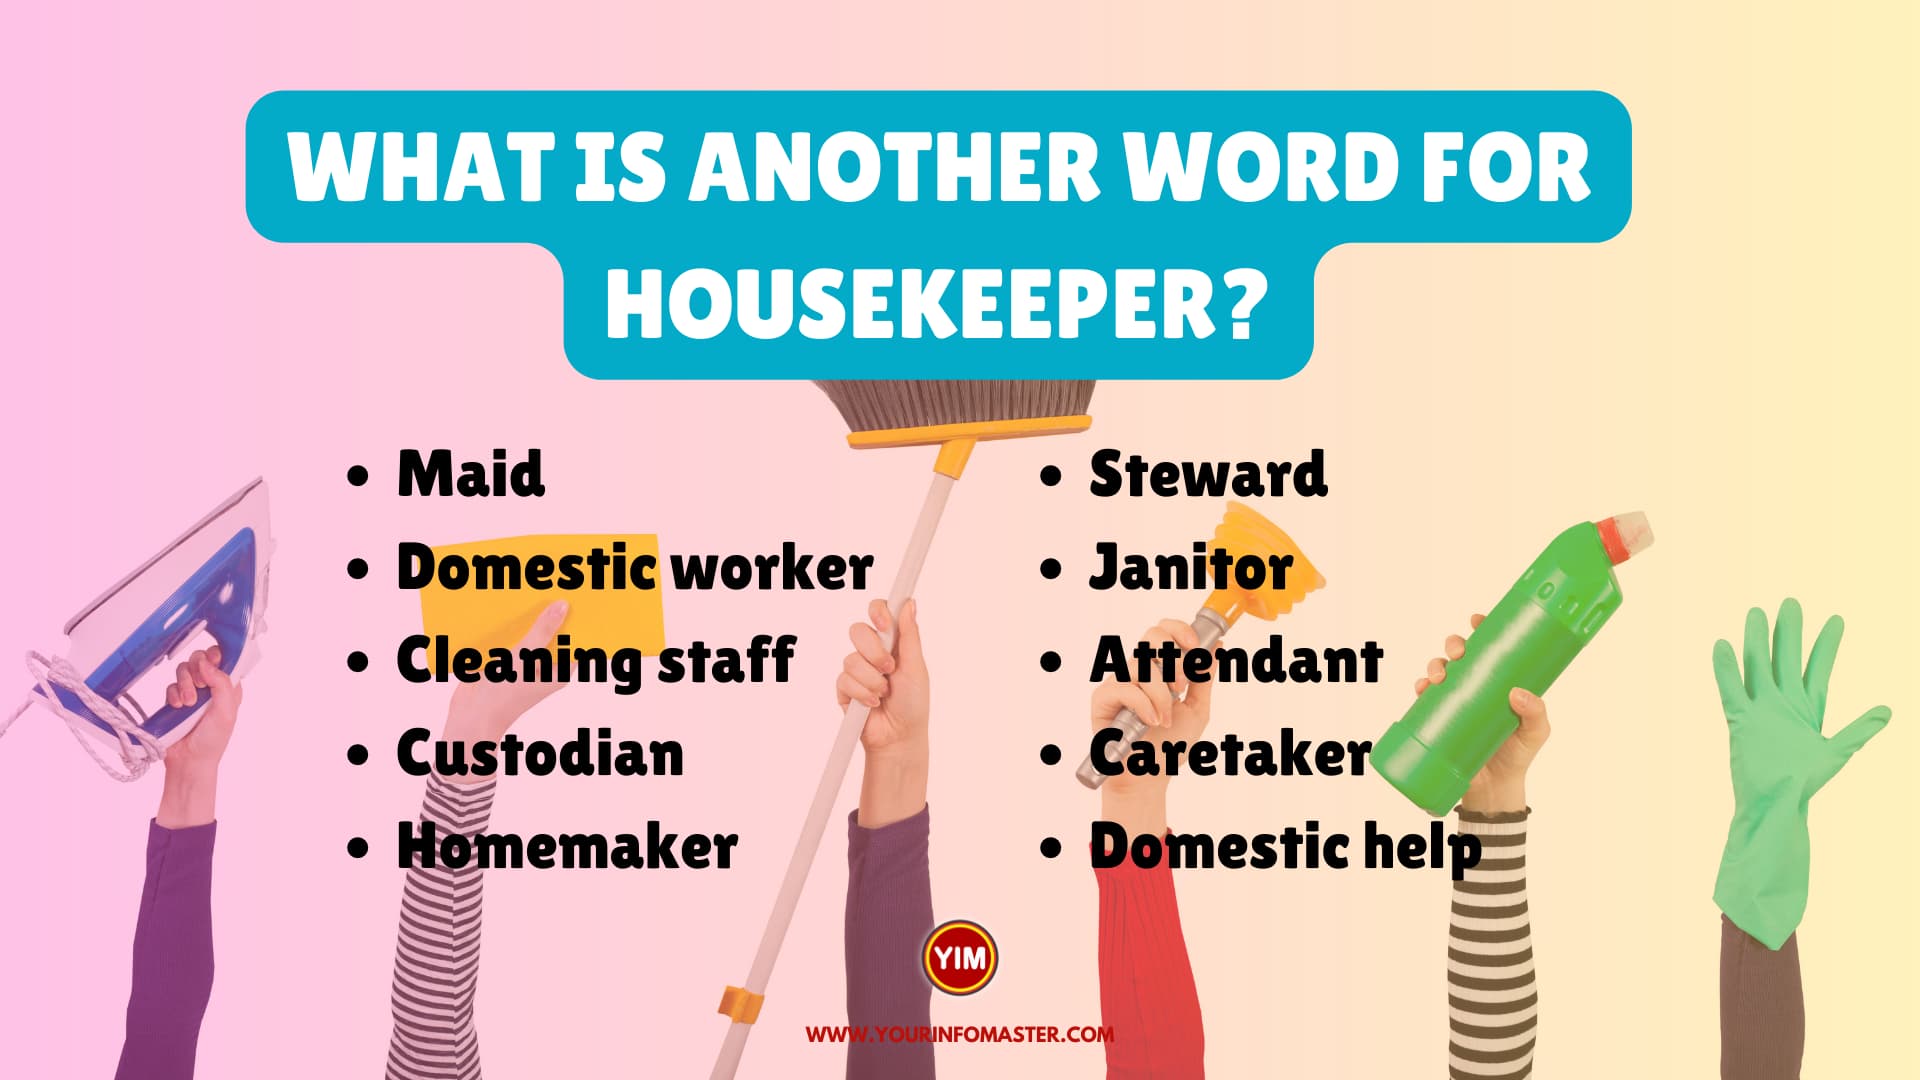 What is another word for housekeeper